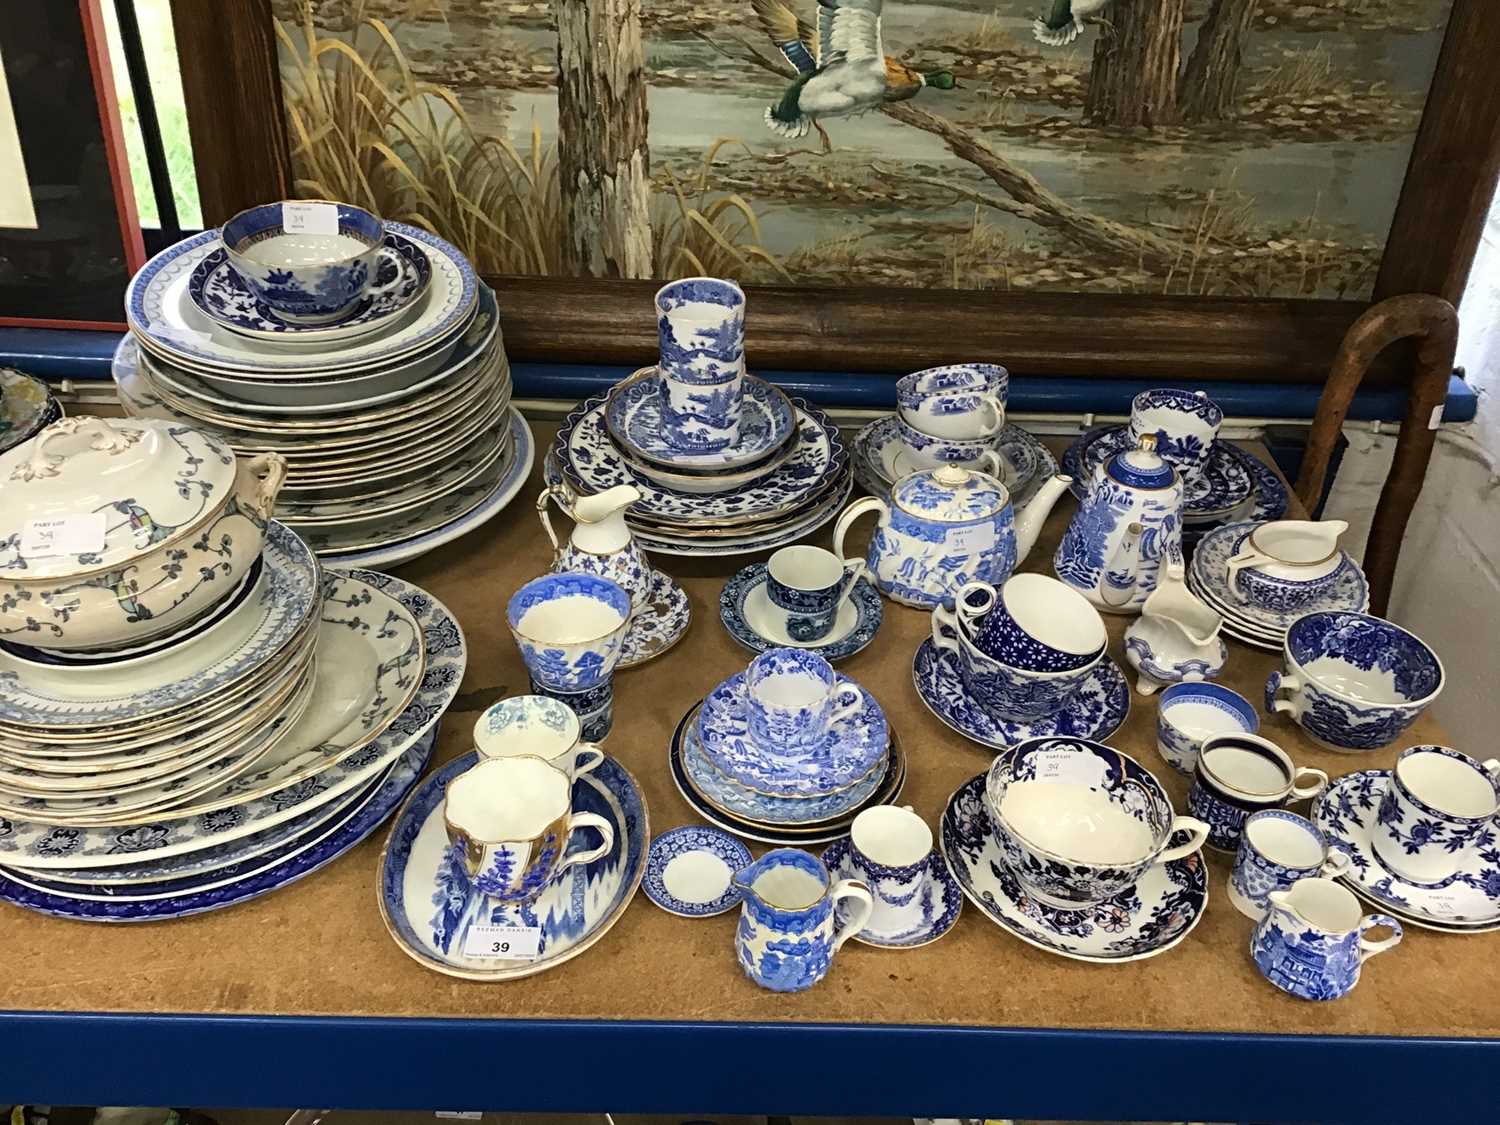 Lot 39 - Group of mostly 19th century blue and white china, including Wedgwood